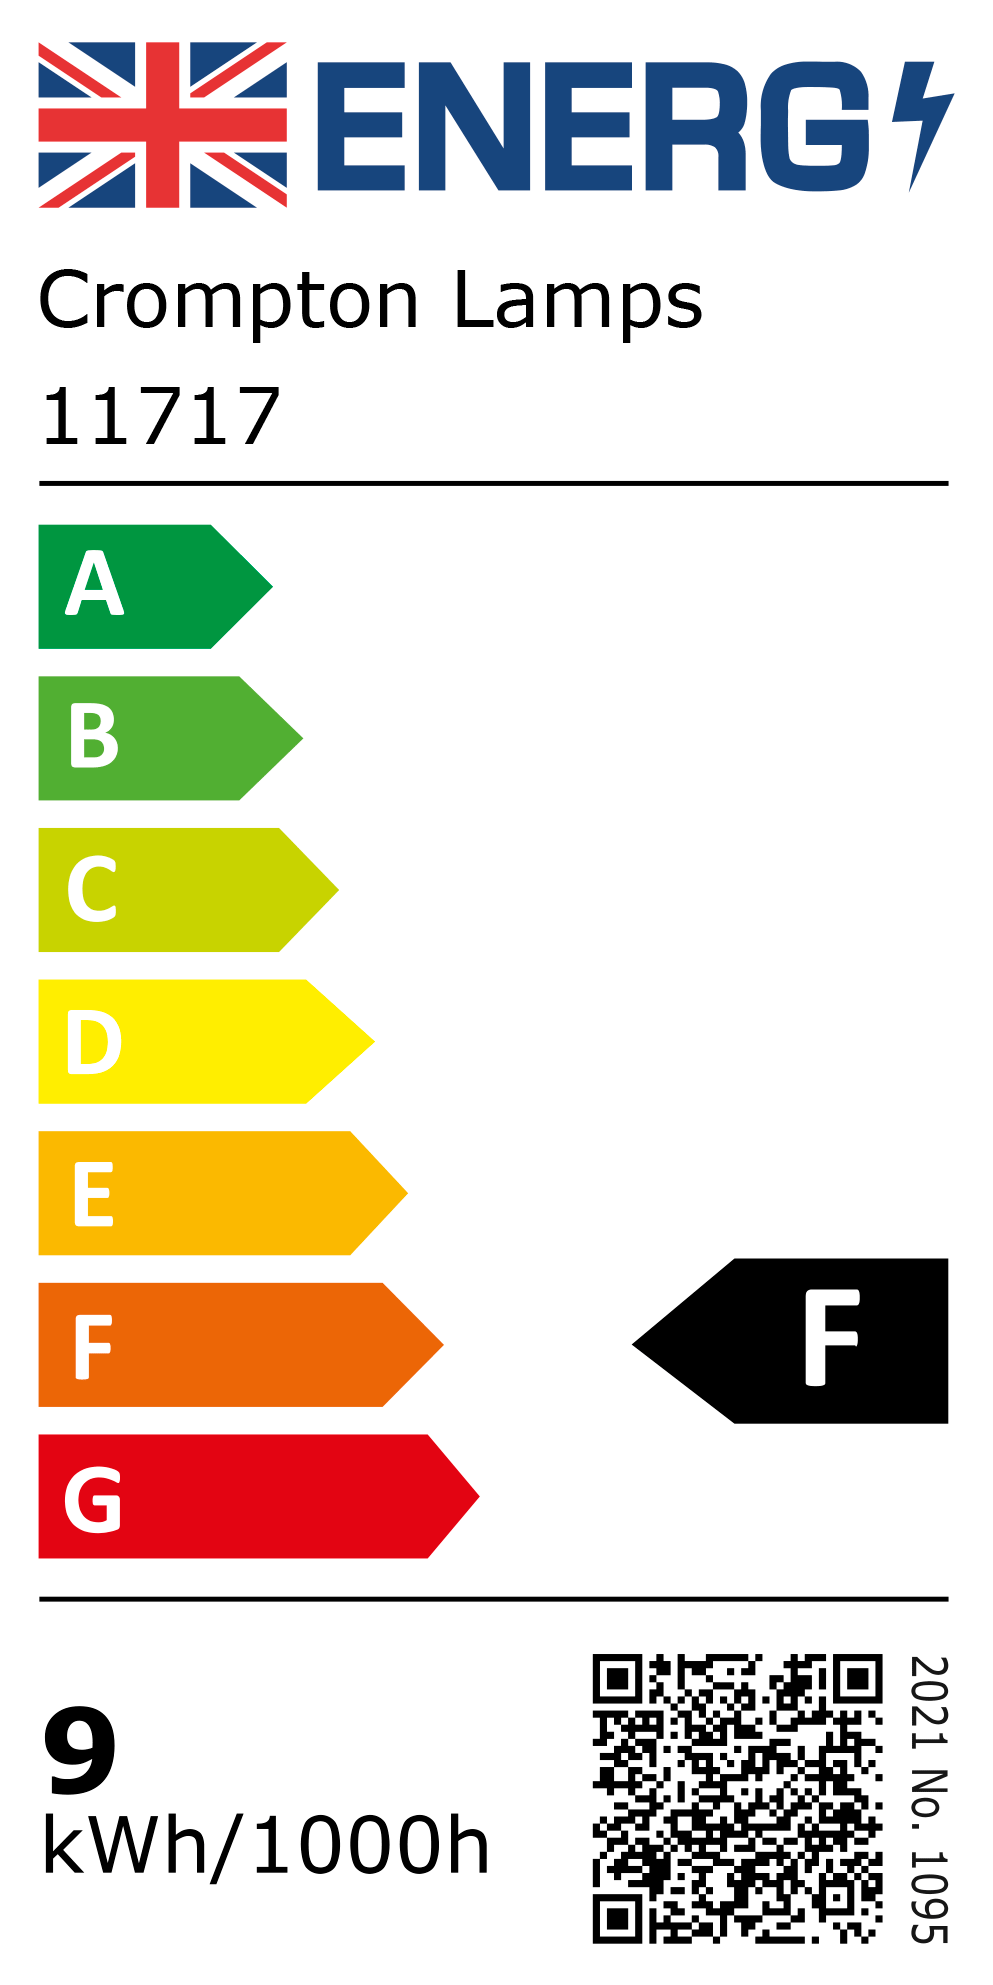 New 2021 Energy Rating Label: Stock Code 11717